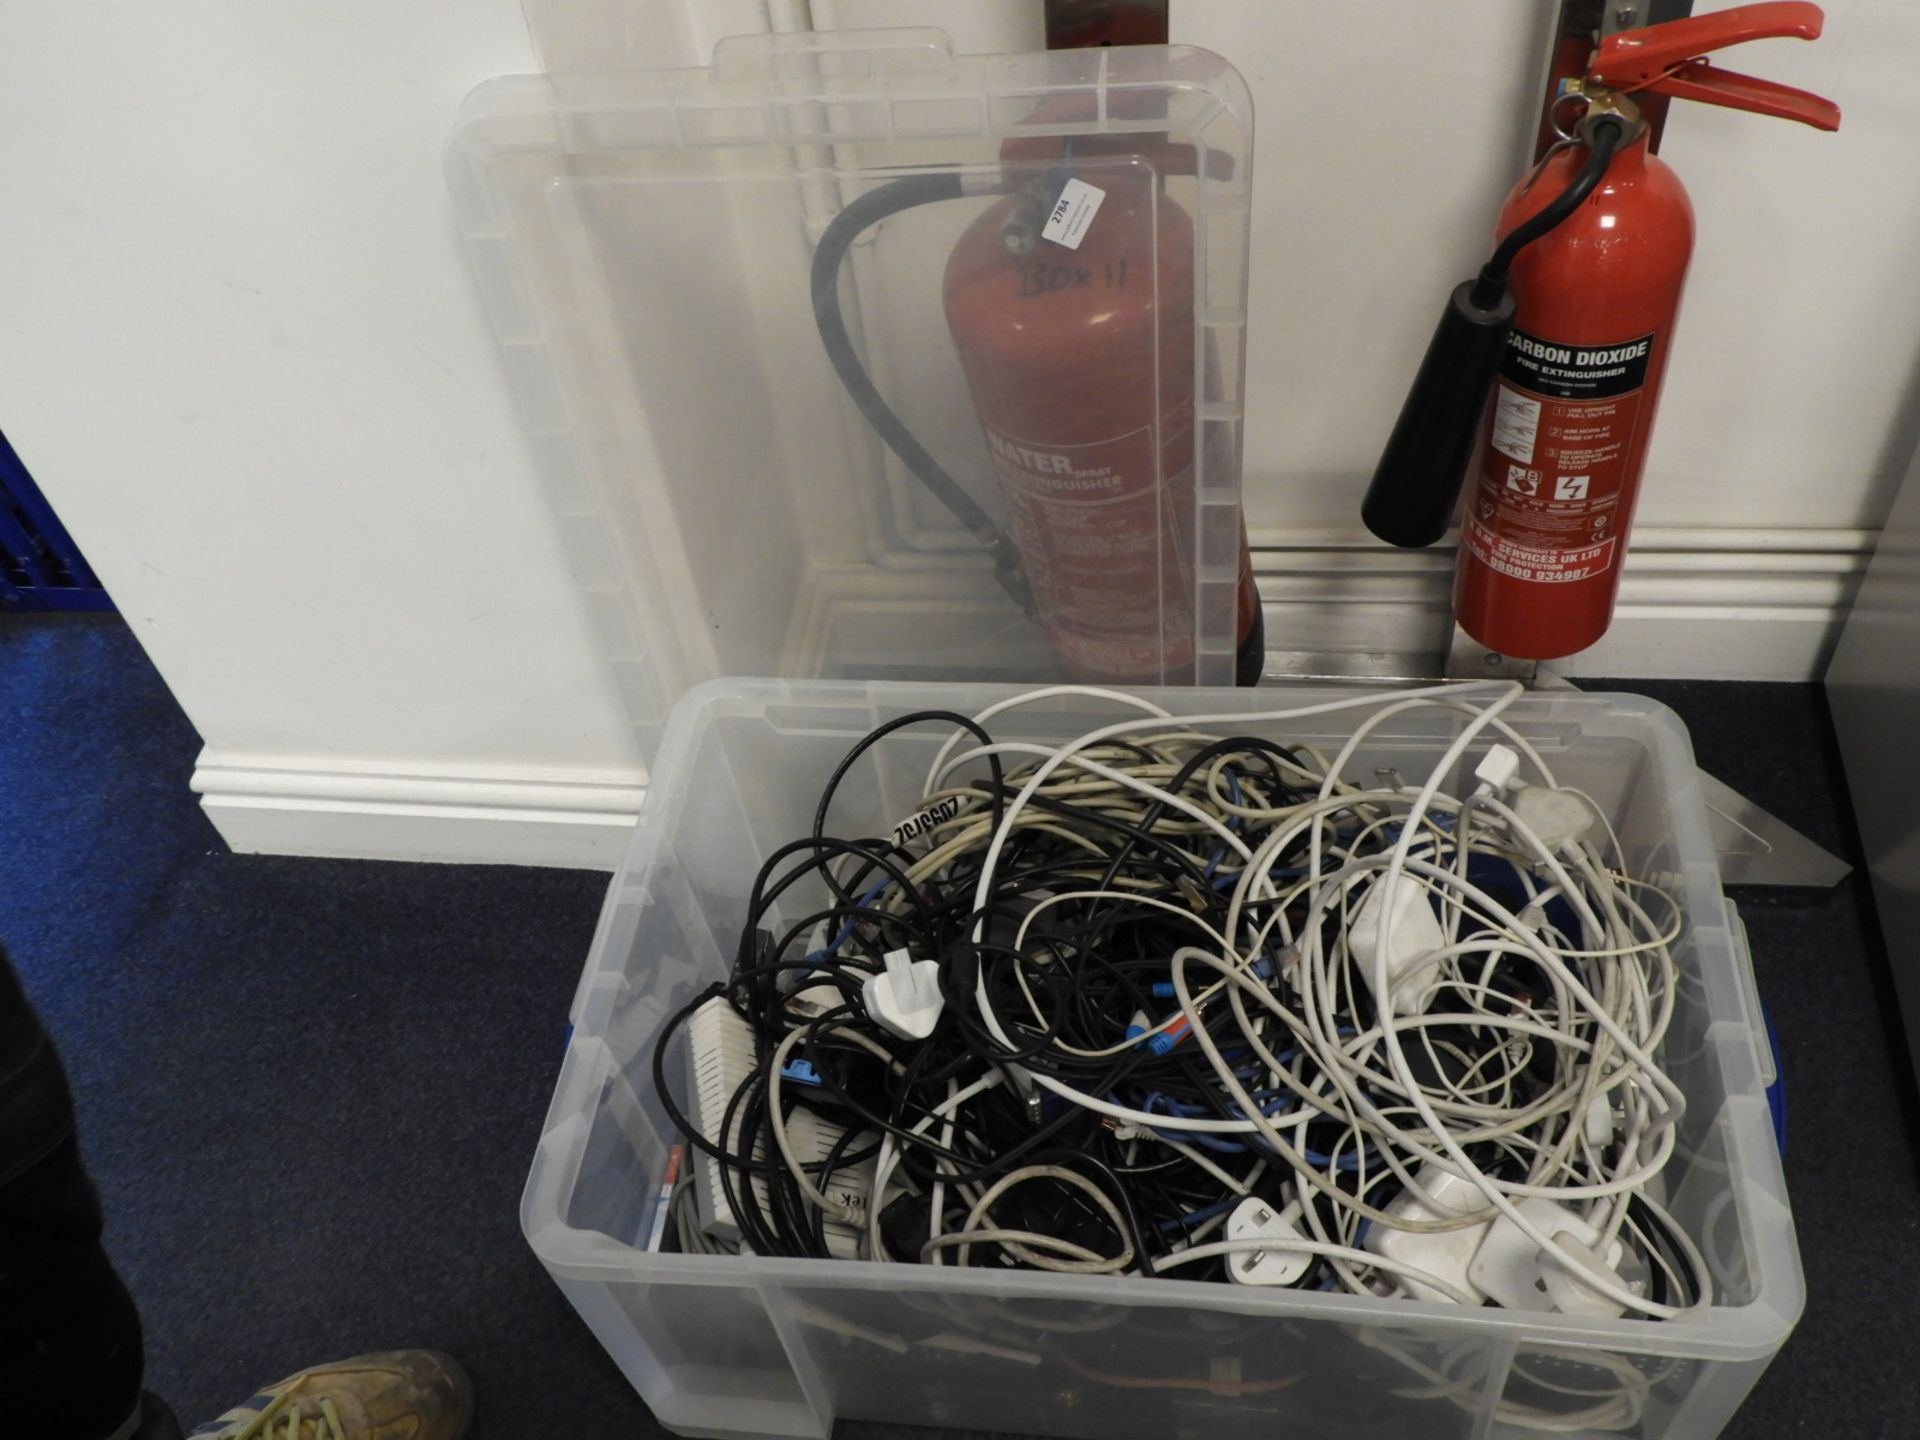 *Box Containing Various Wires, Macbook Pro Adapters, Cables, etc.